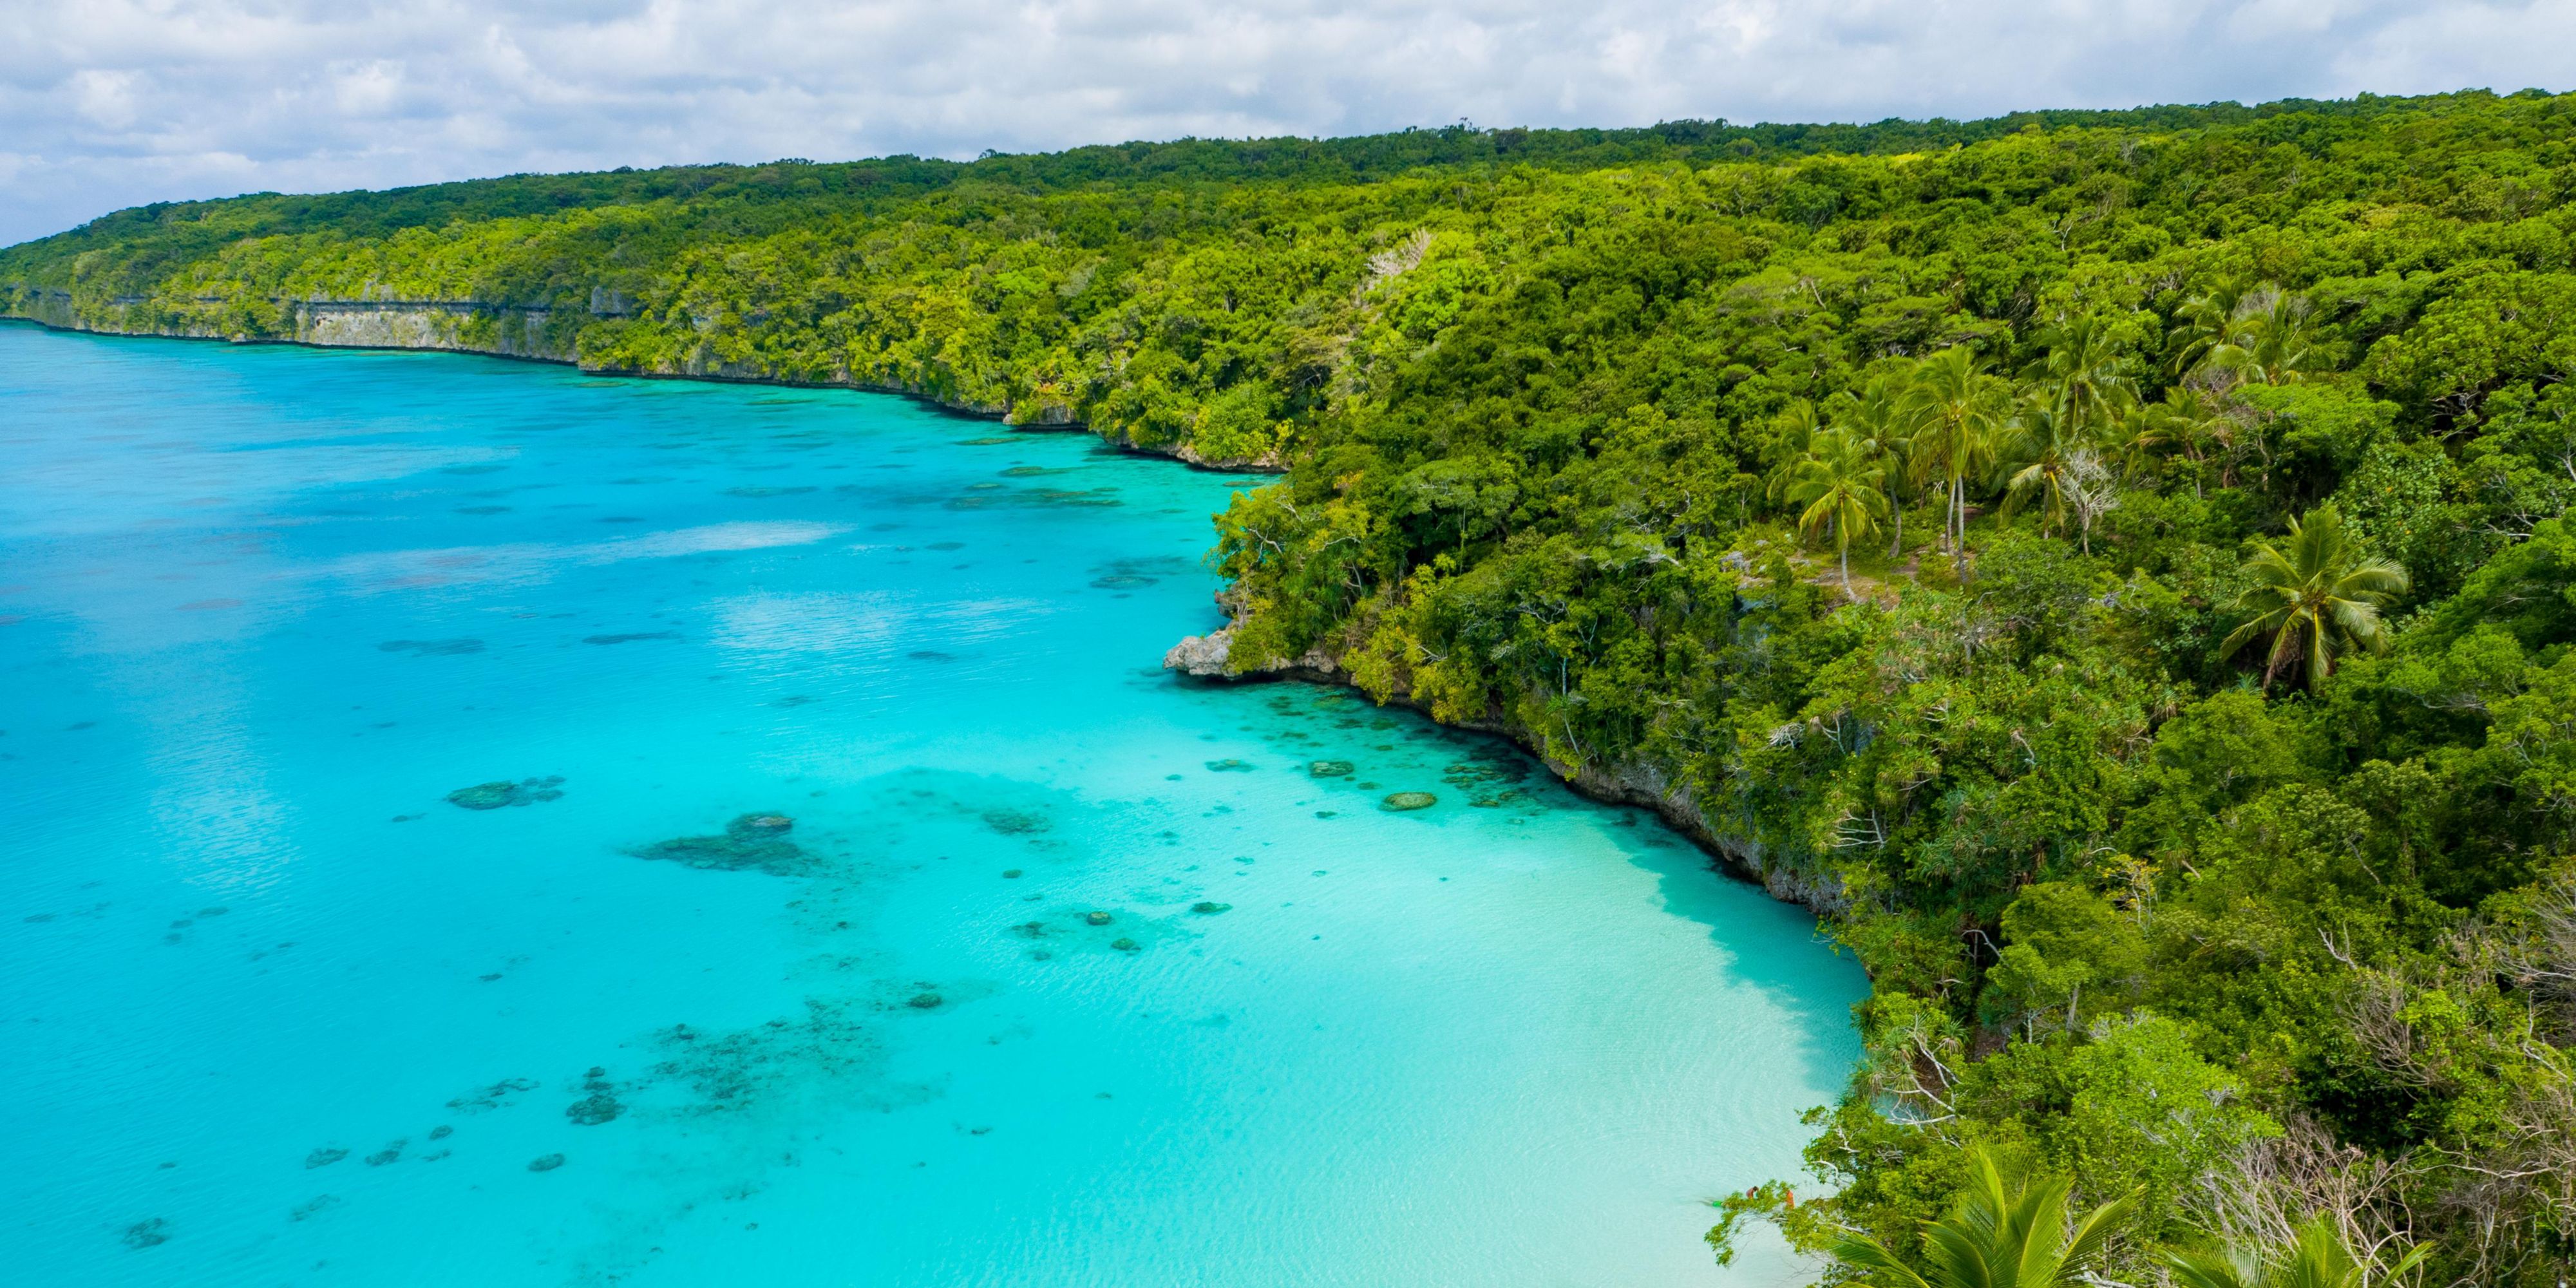 New Caledonia encloses the world’s largest lagoon and Lifou represents its unspoiled gem. Whether you experience snorkeling or scuba diving, the underwater activities will enrich you with unforgettable pristine decors and numerous endemic fauna and flora encounters.